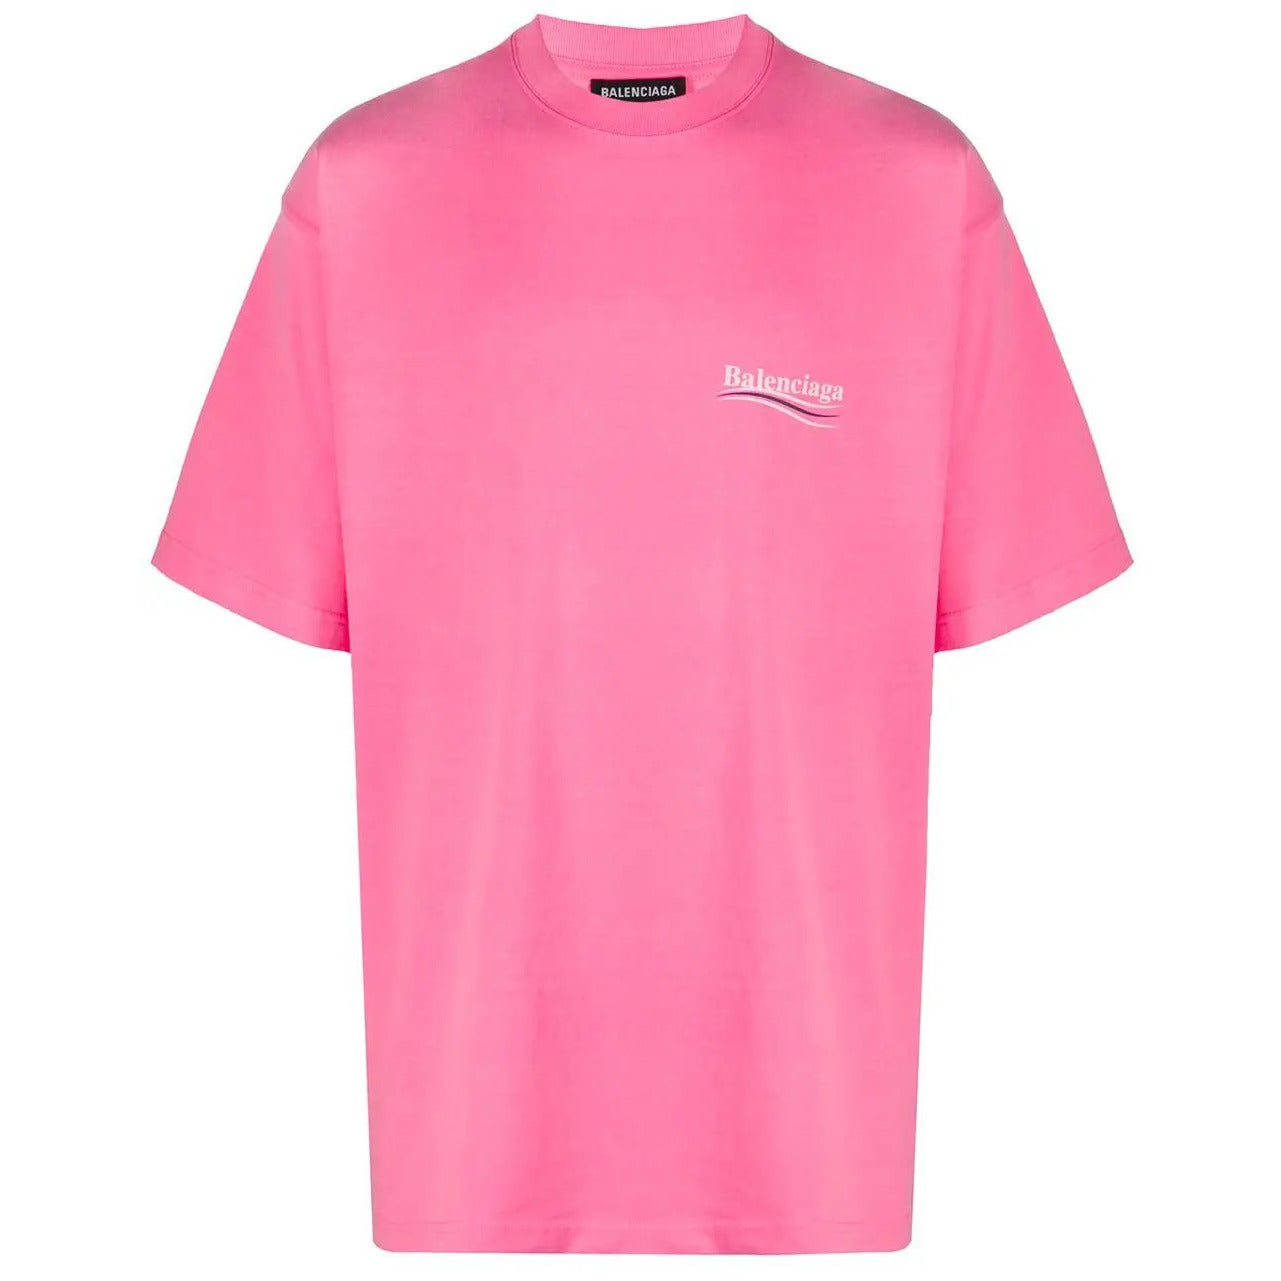 Balenciaga Political Campaign T-shirt in Vintage Jersey in Pink